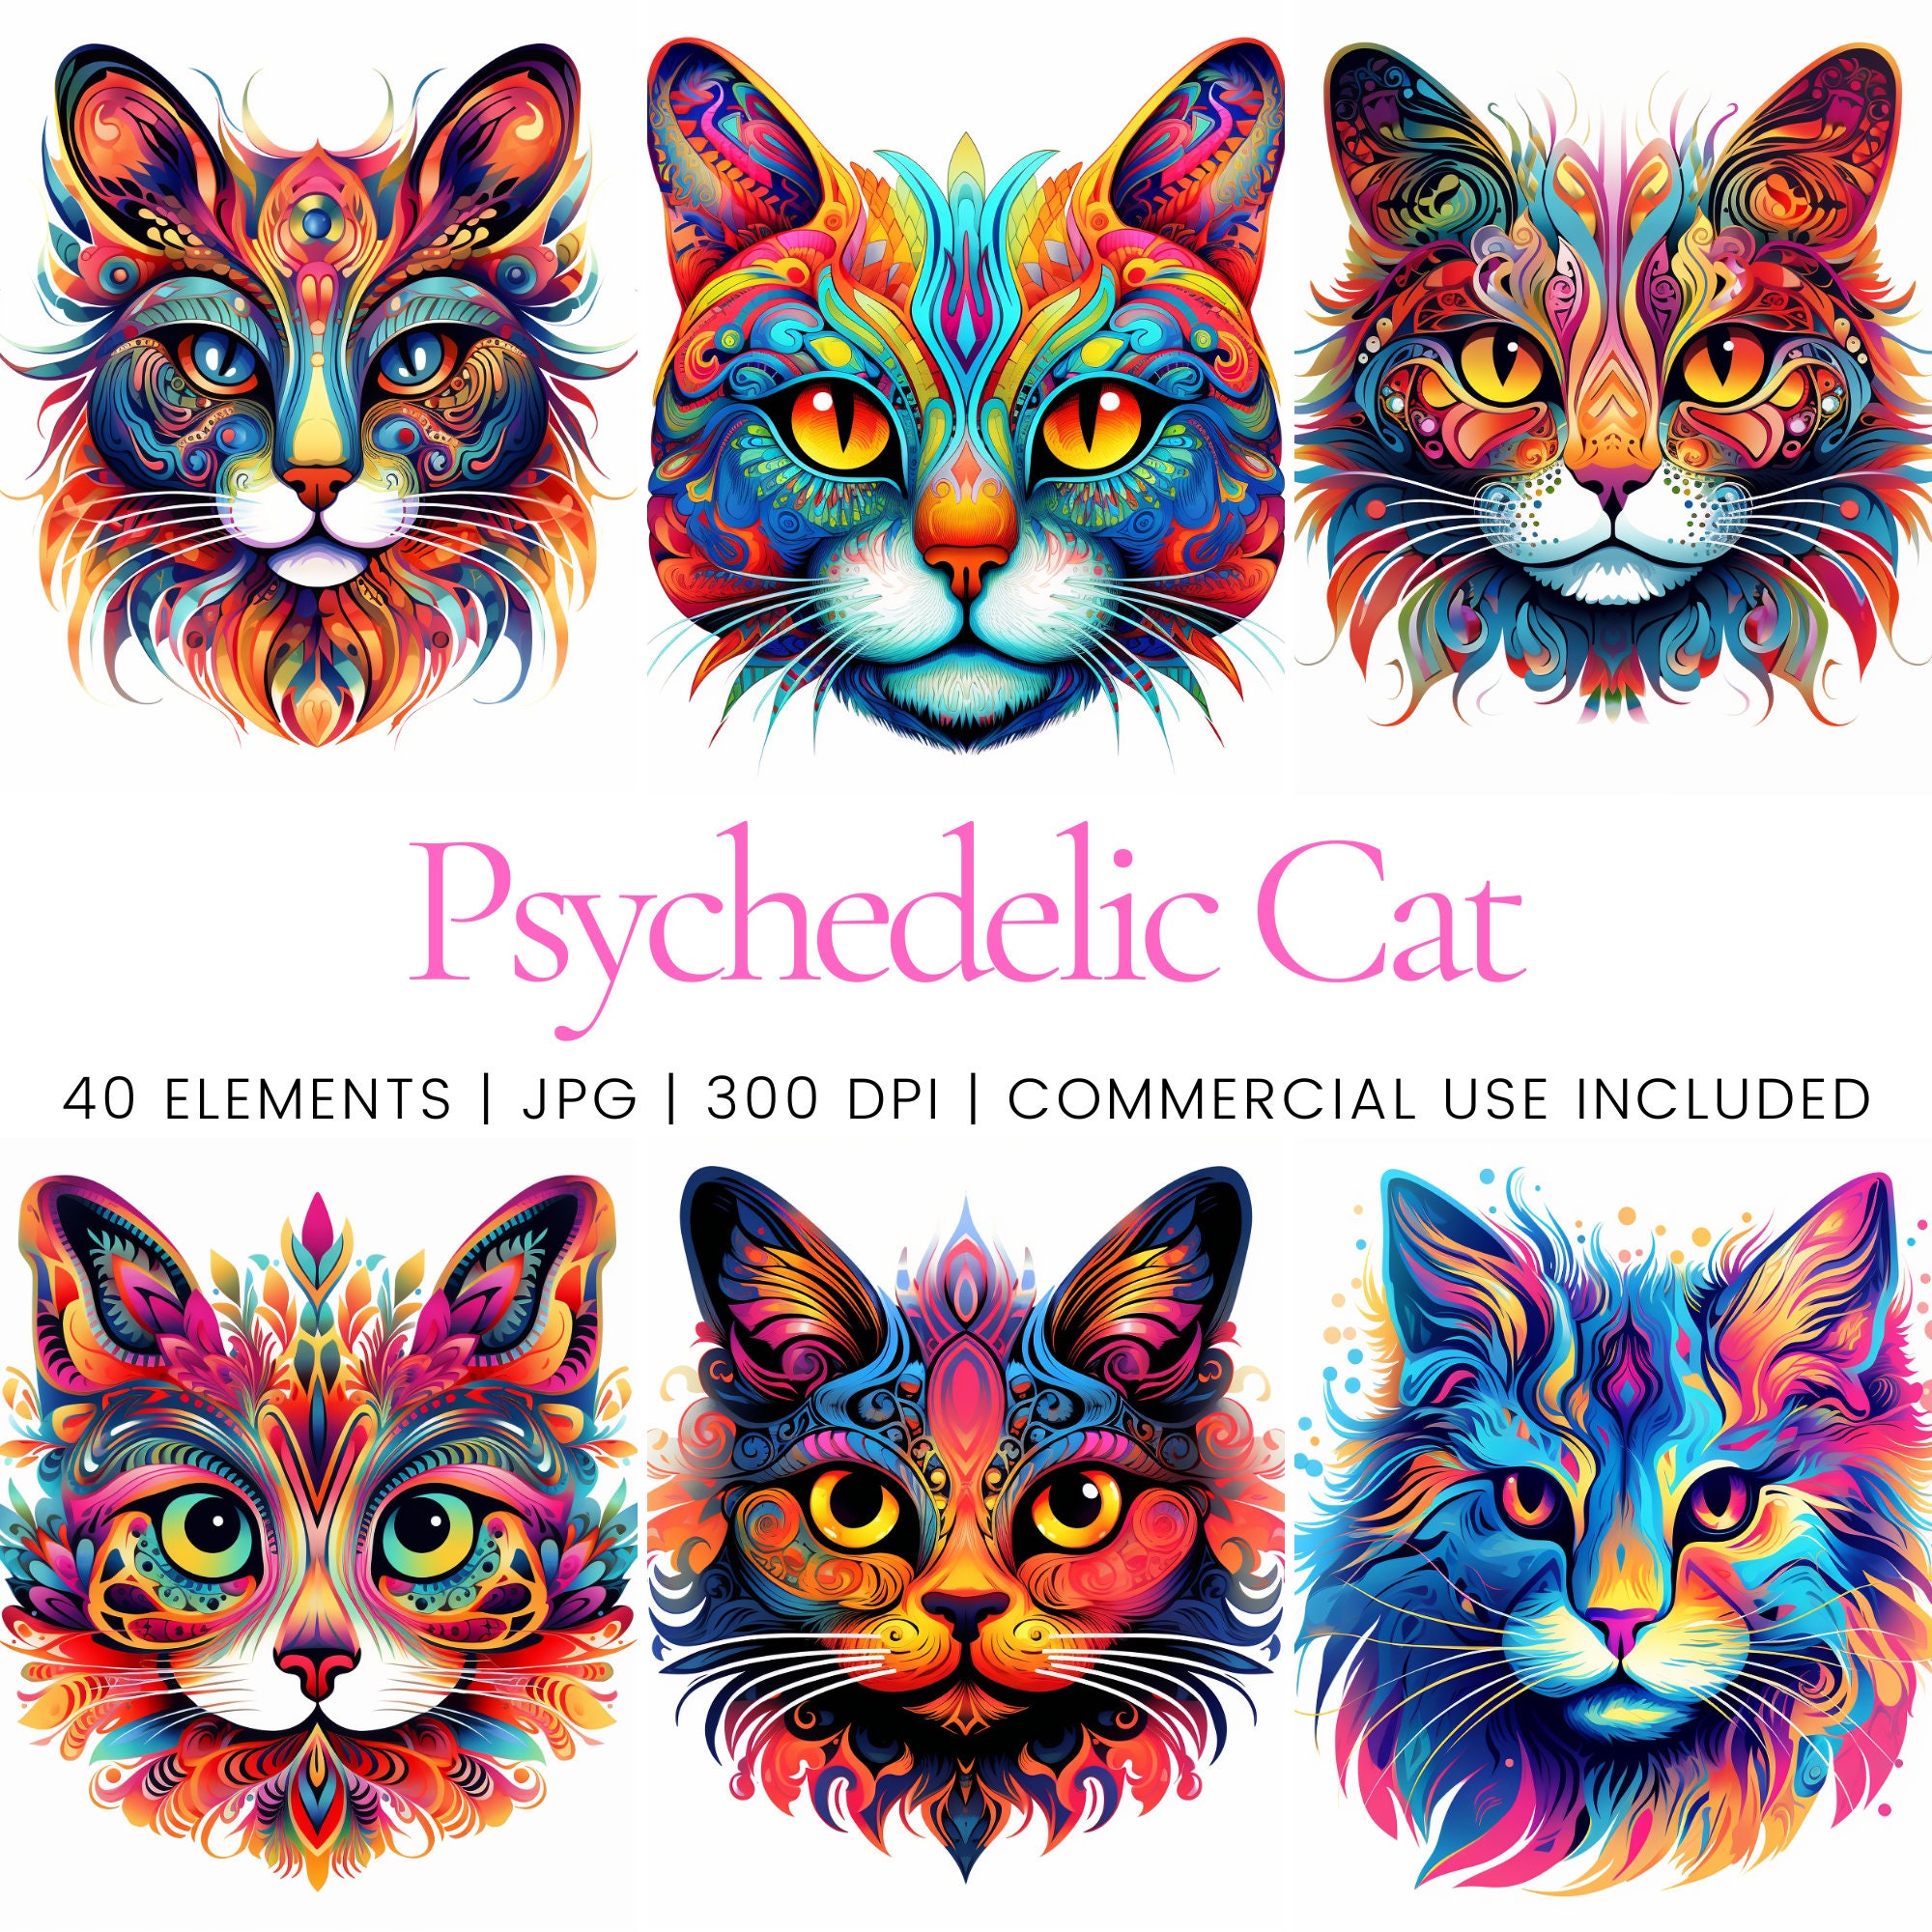 Printable Fractal Cat by Louis Wain - weird, odd, psychedelic art